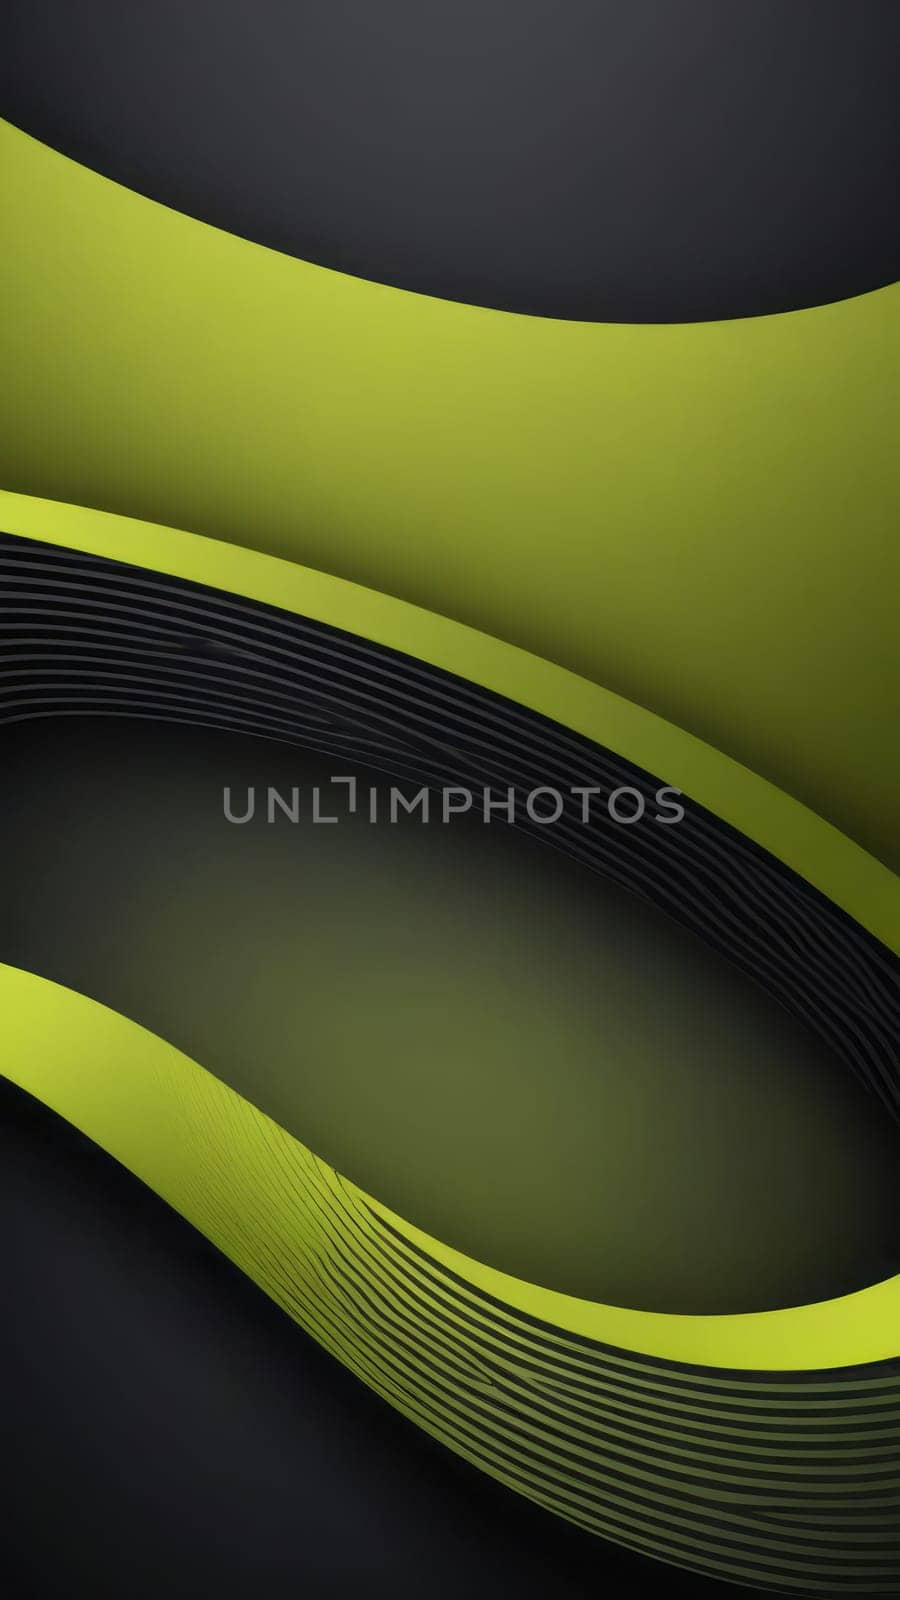 Screen background from Curvilinear shapes and black by nkotlyar